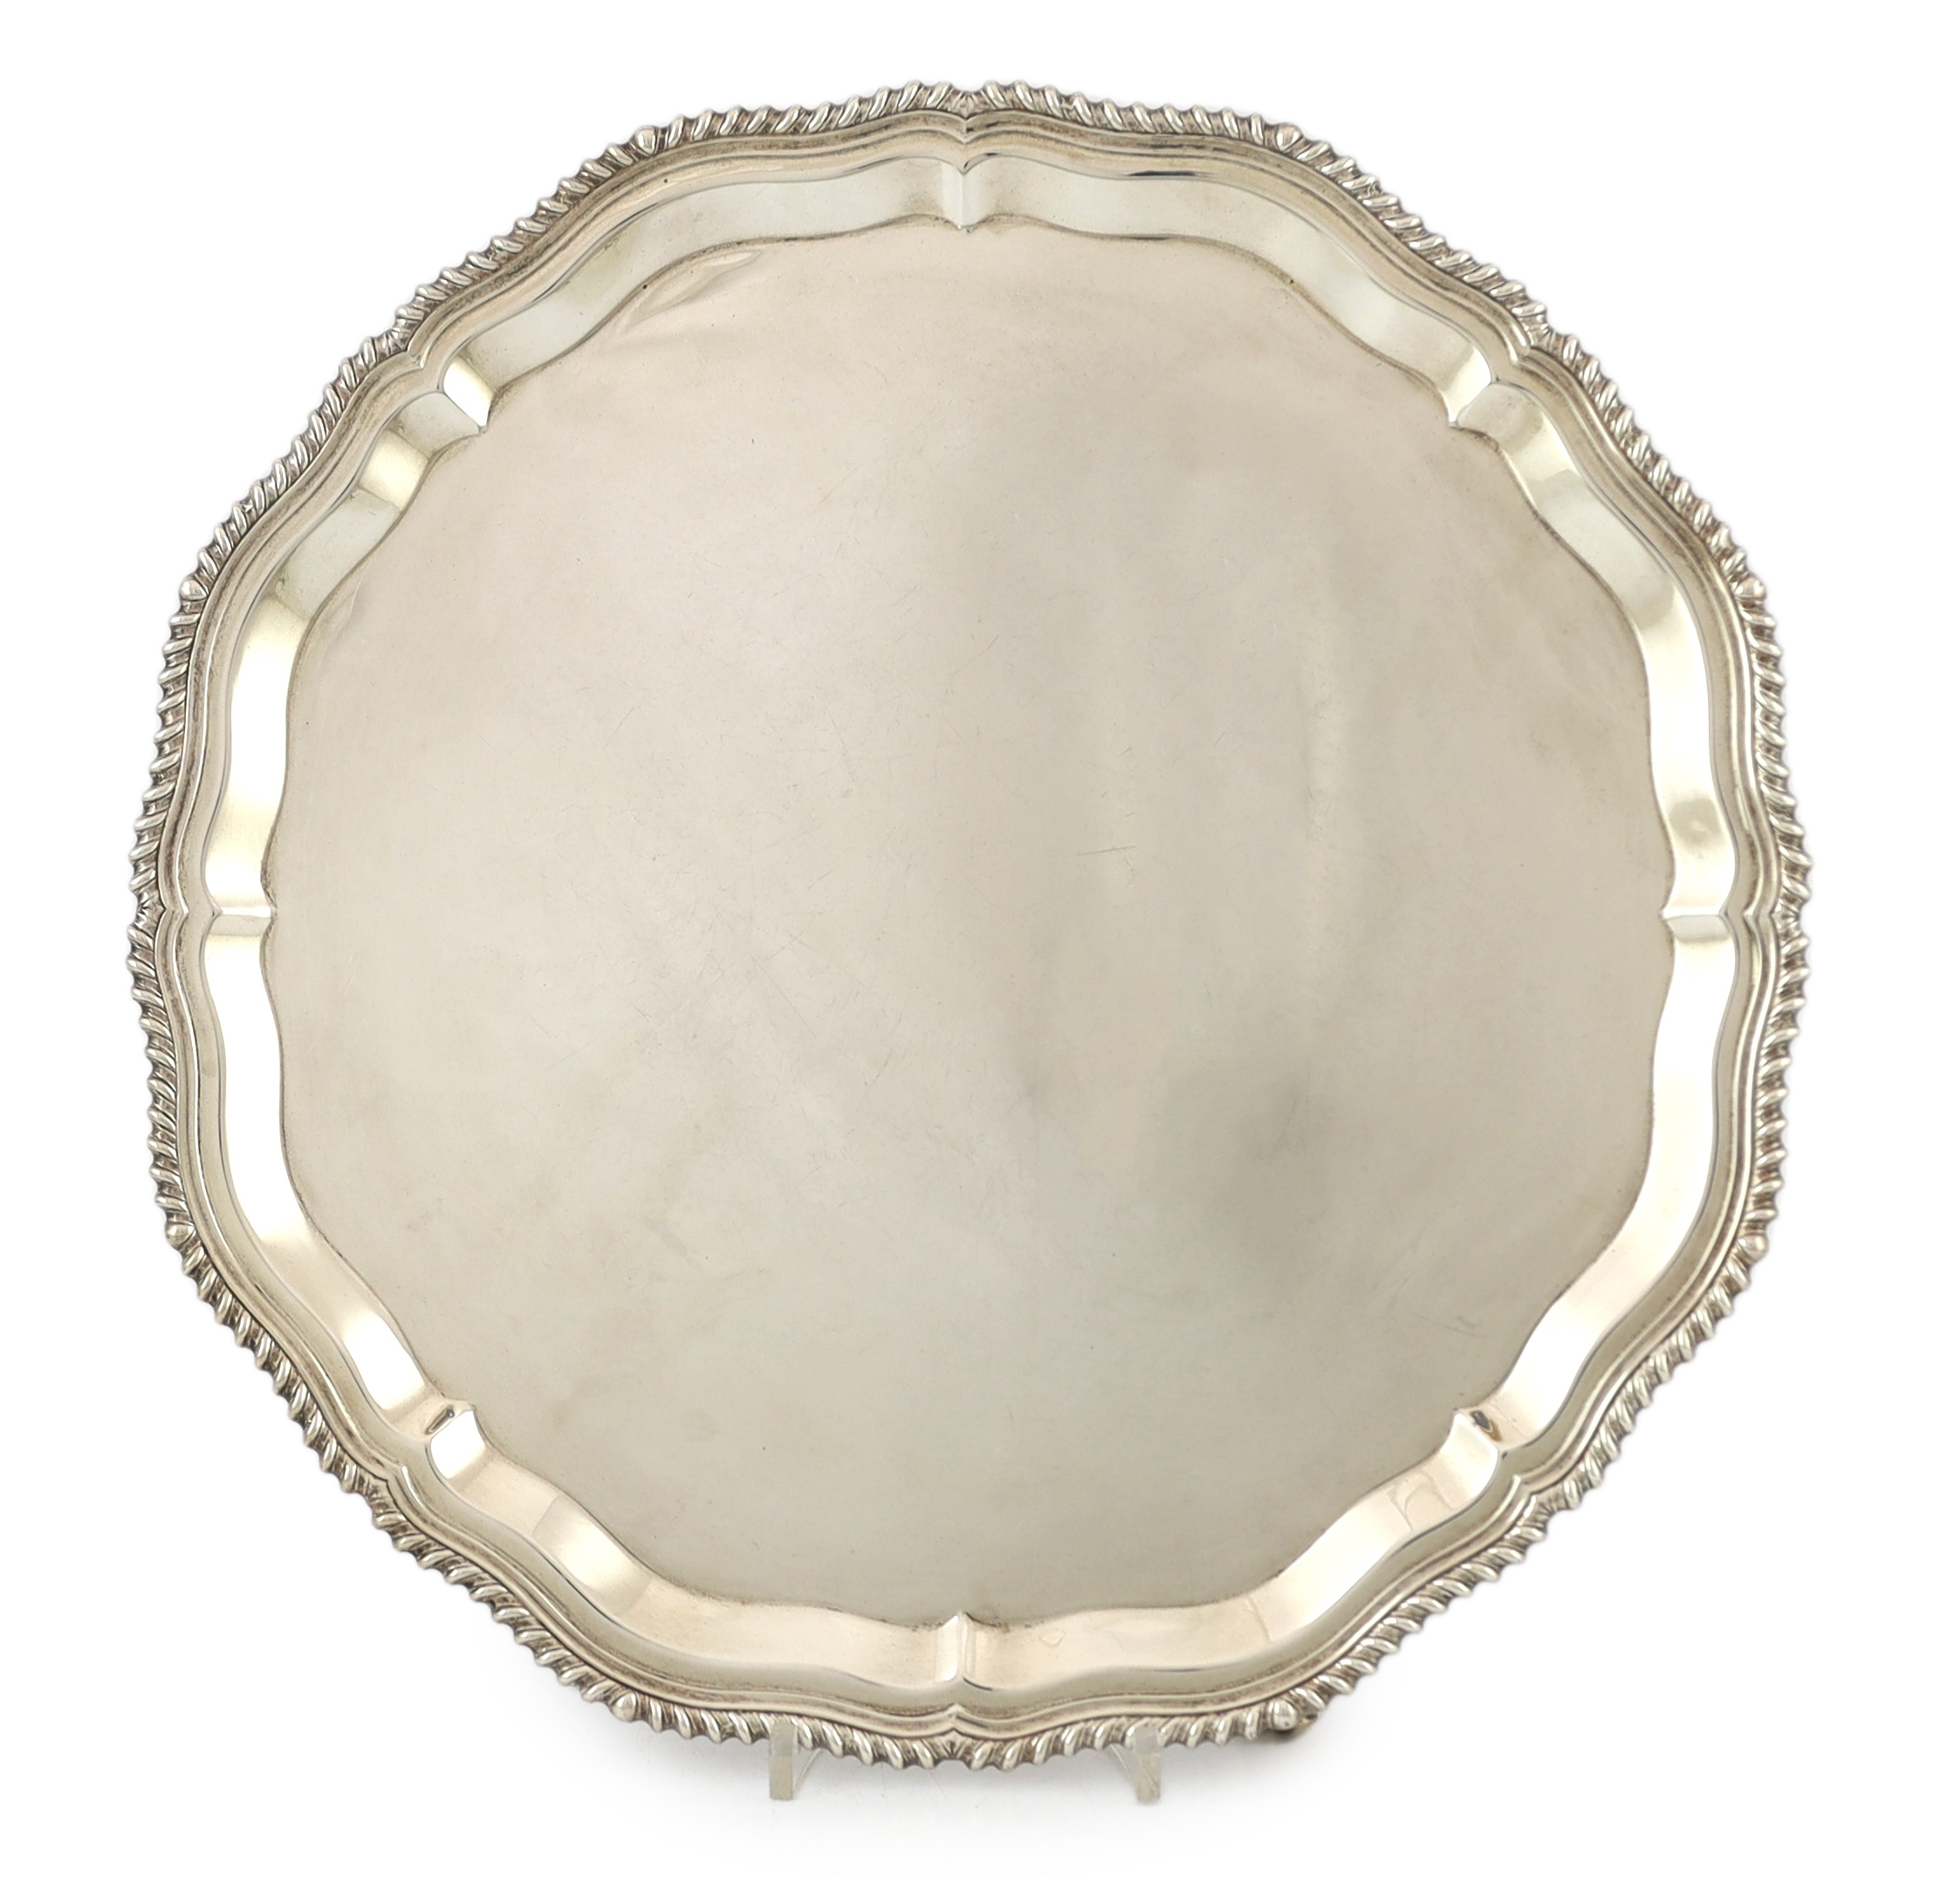 A large Elizabeth II circular silver salver, with piecrust and gadrooned edge, on four scrolled feet, by J.B. Chatterley & Sons Ltd